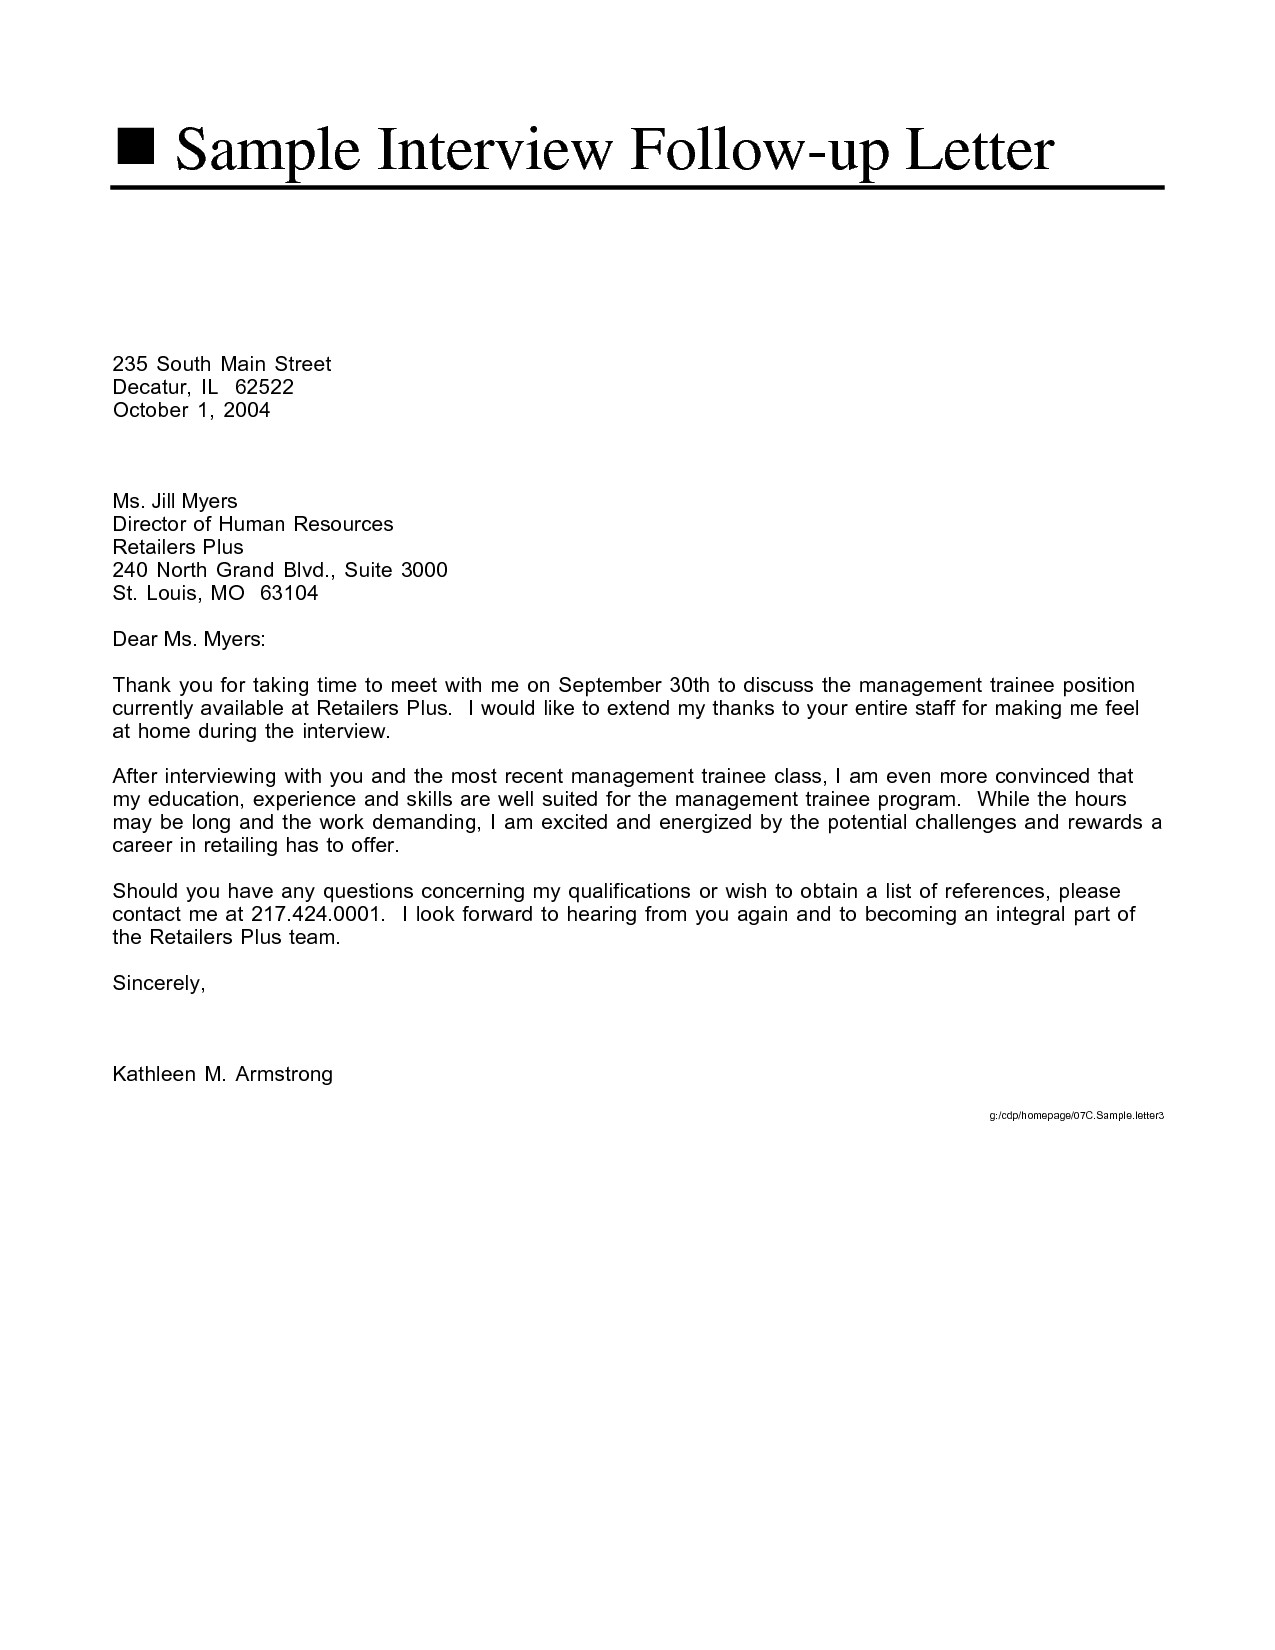 Interview Follow Up Letter Letters To Send After An Document Offer Email Sample